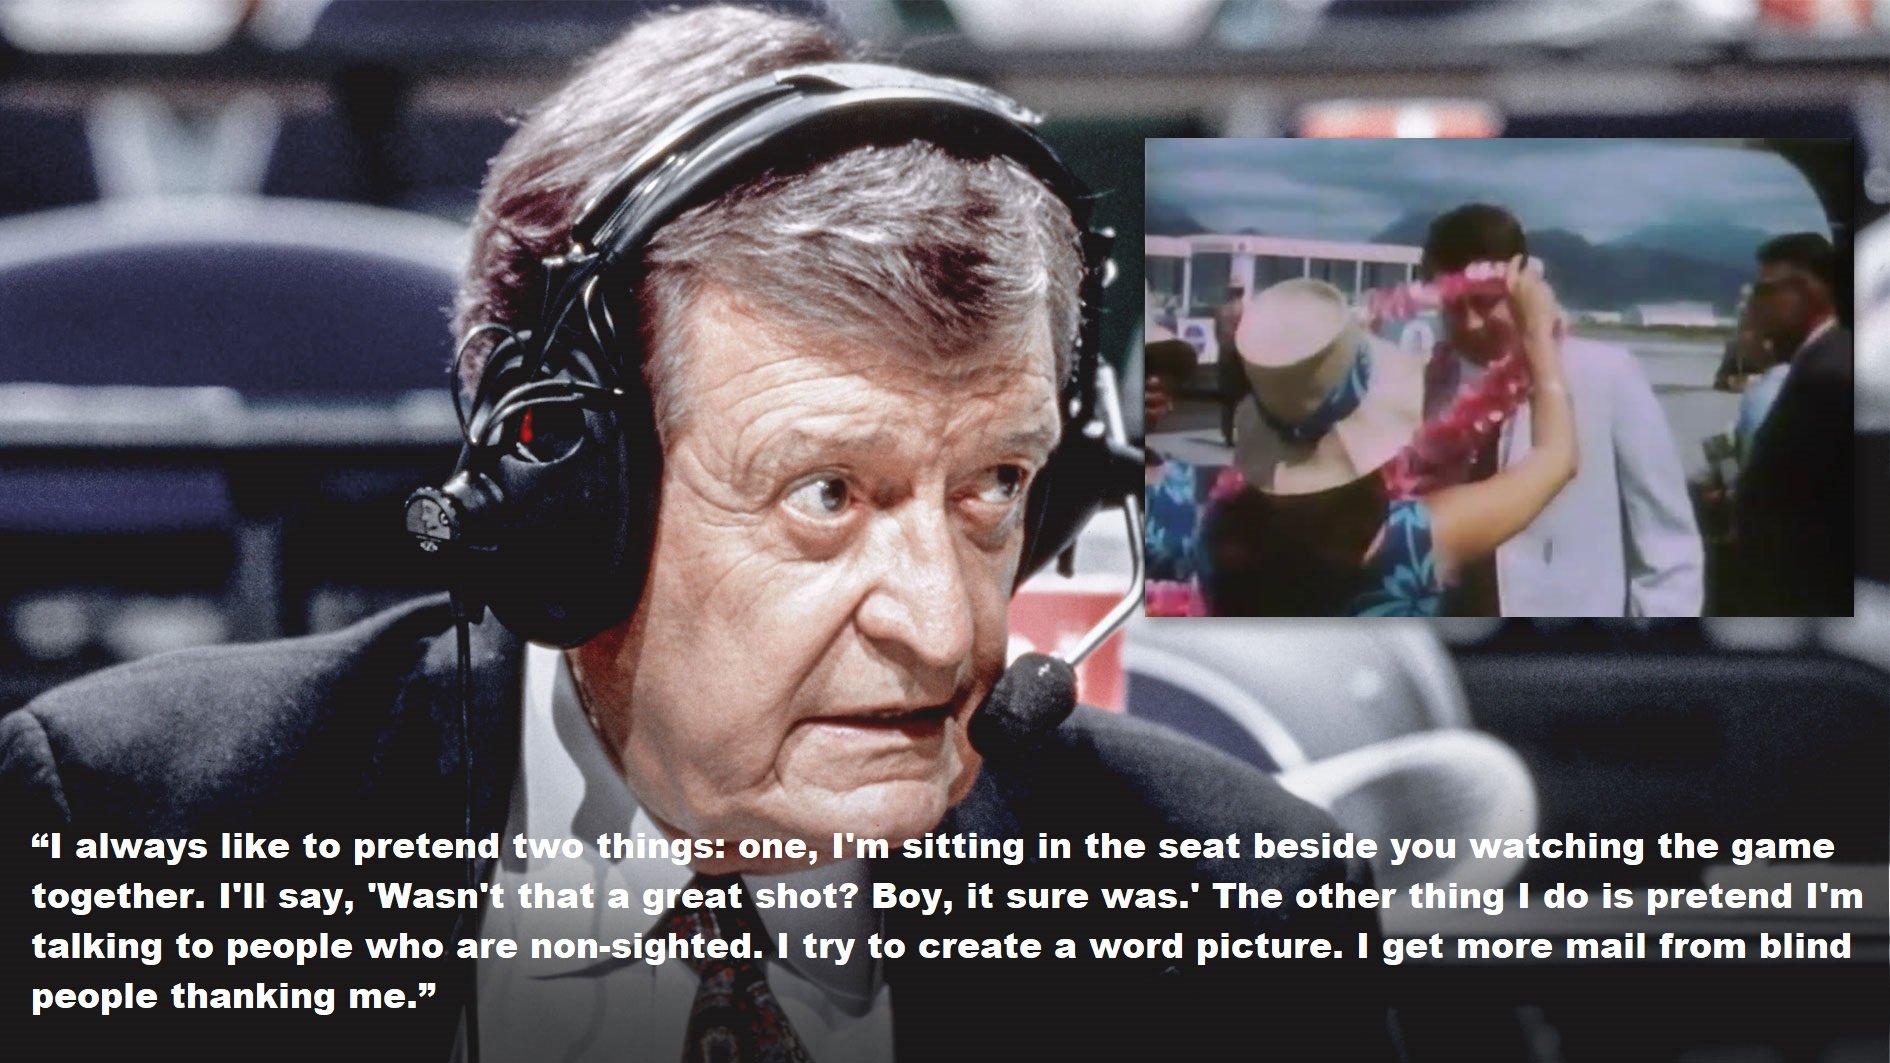 Chick Hearn Quotes